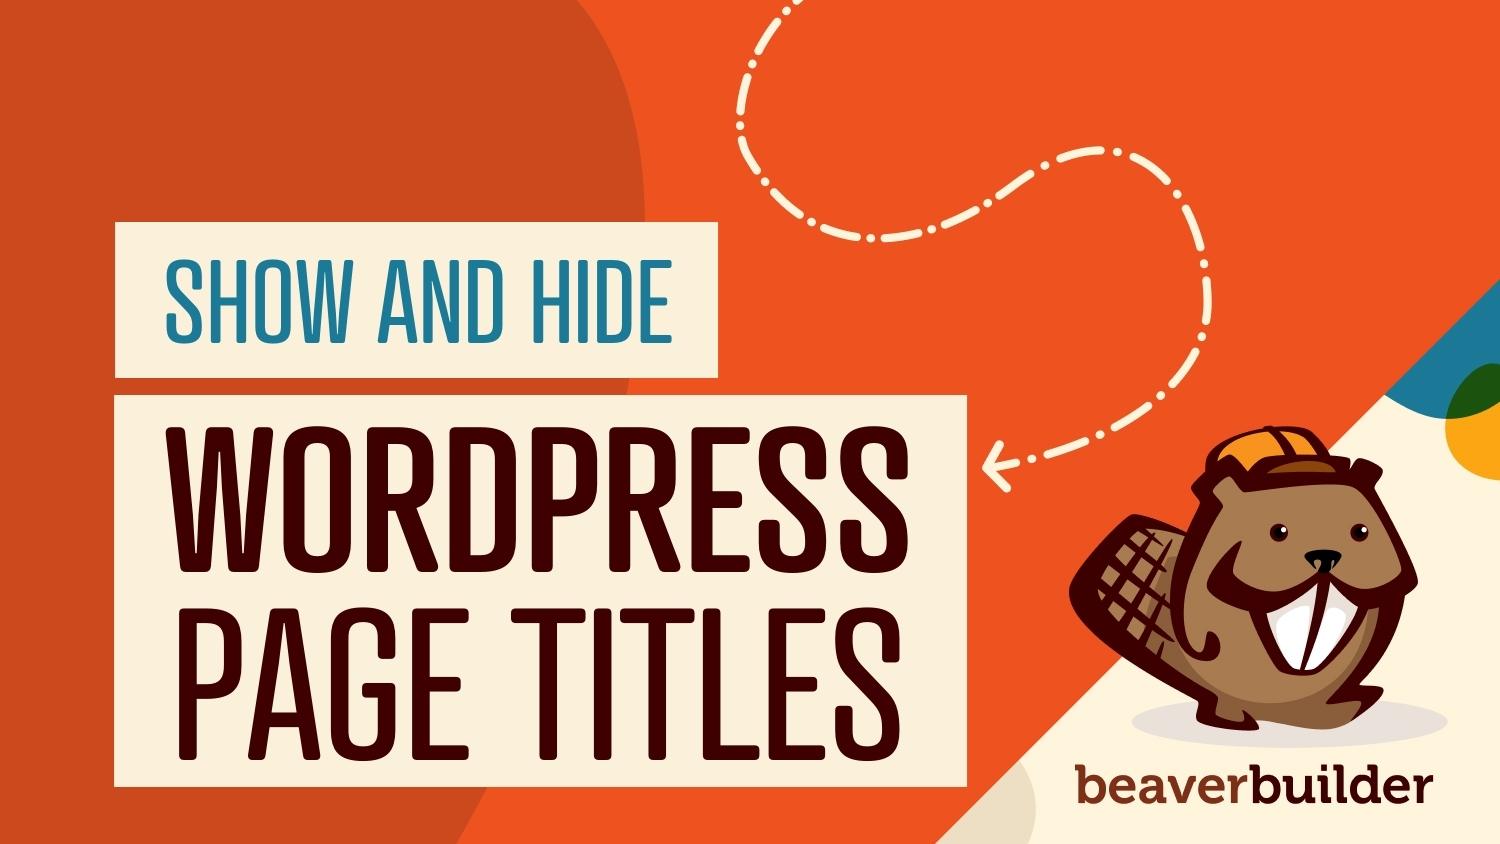 How to show and hide wordpress page titles using beaver builder